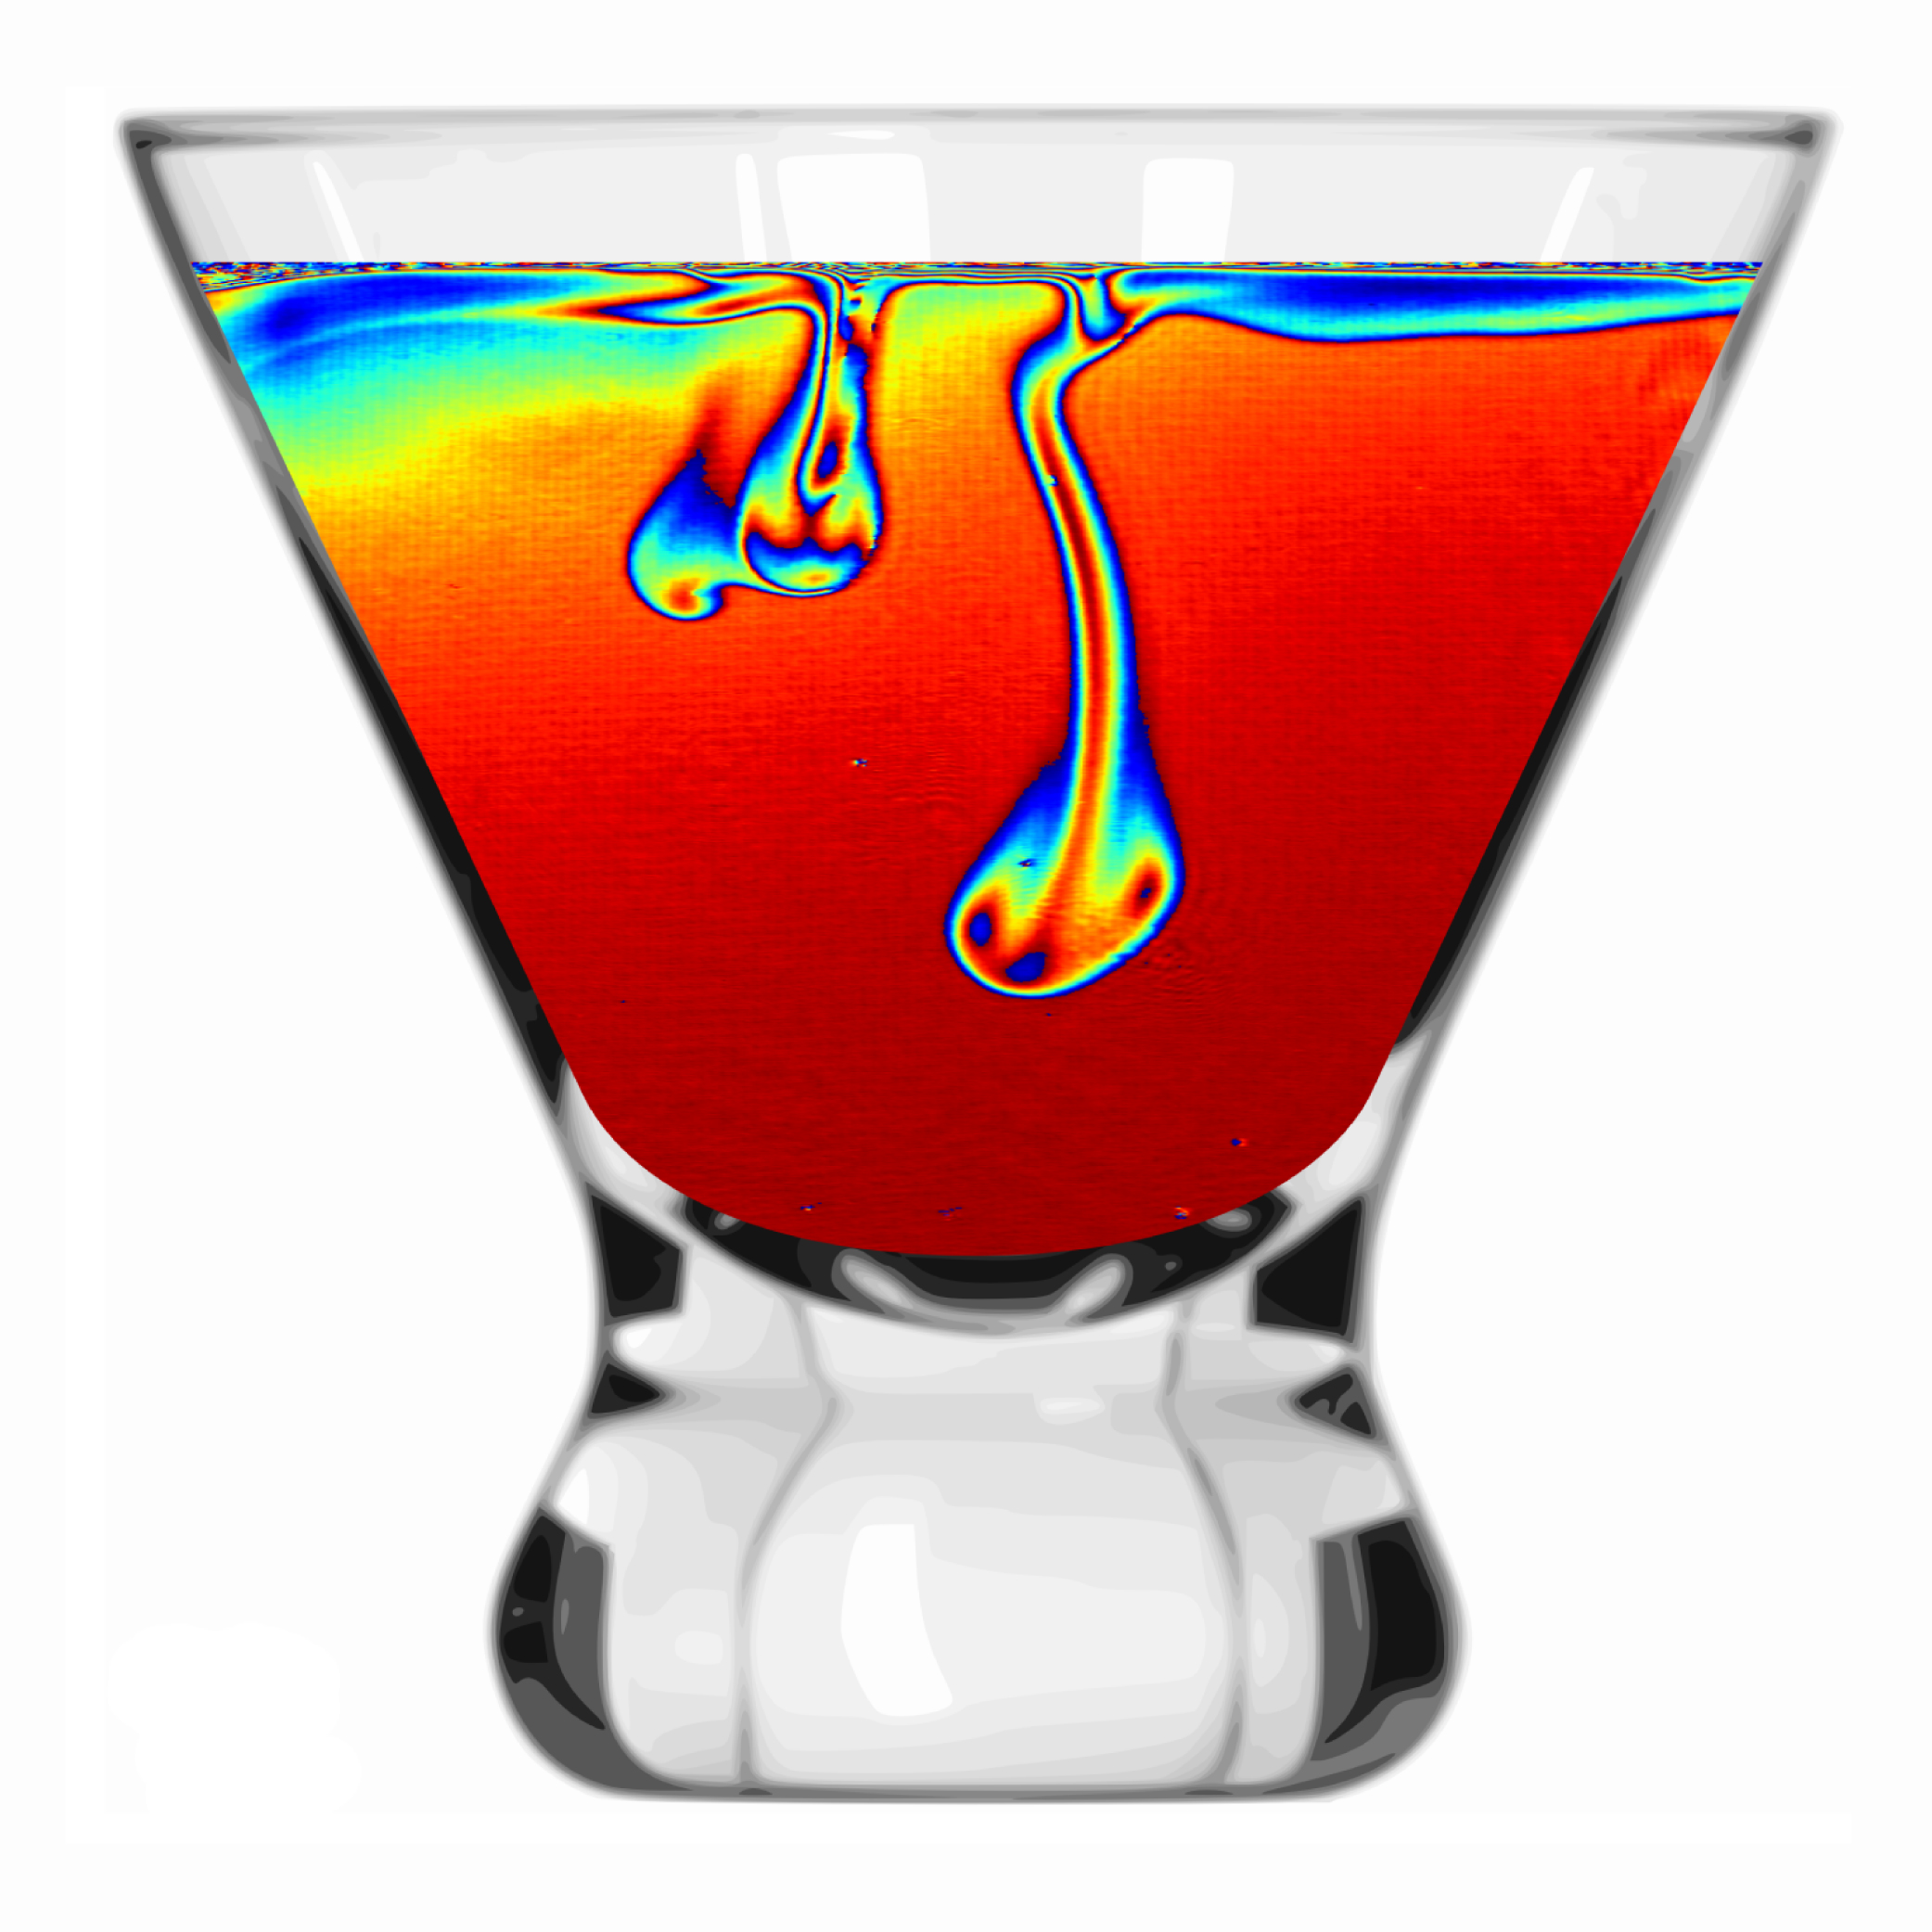 Imaging of phase differences between two liquids in a shot glass.